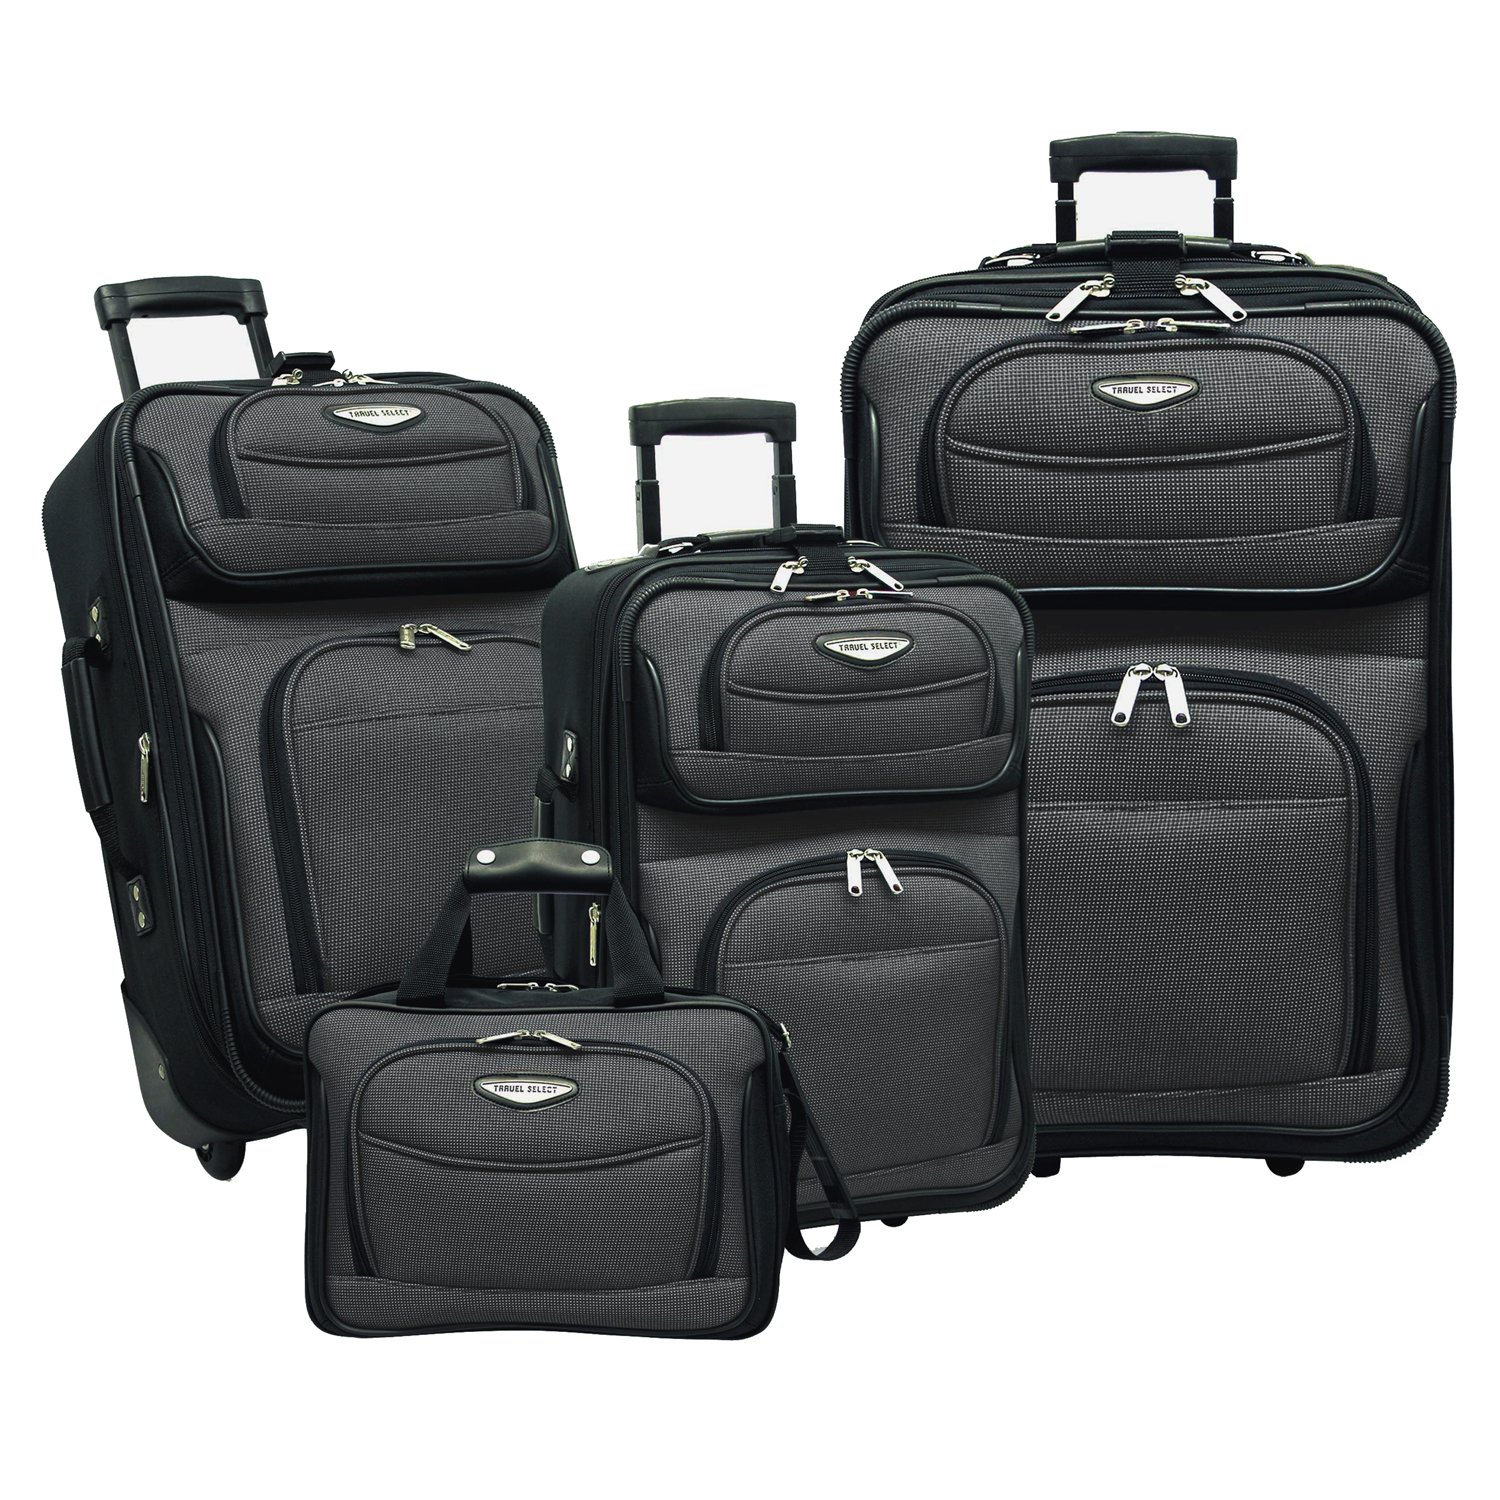 Travel Select Amsterdam Expandable Rolling Upright Luggage, Gray, 4-Piece Set $62.10